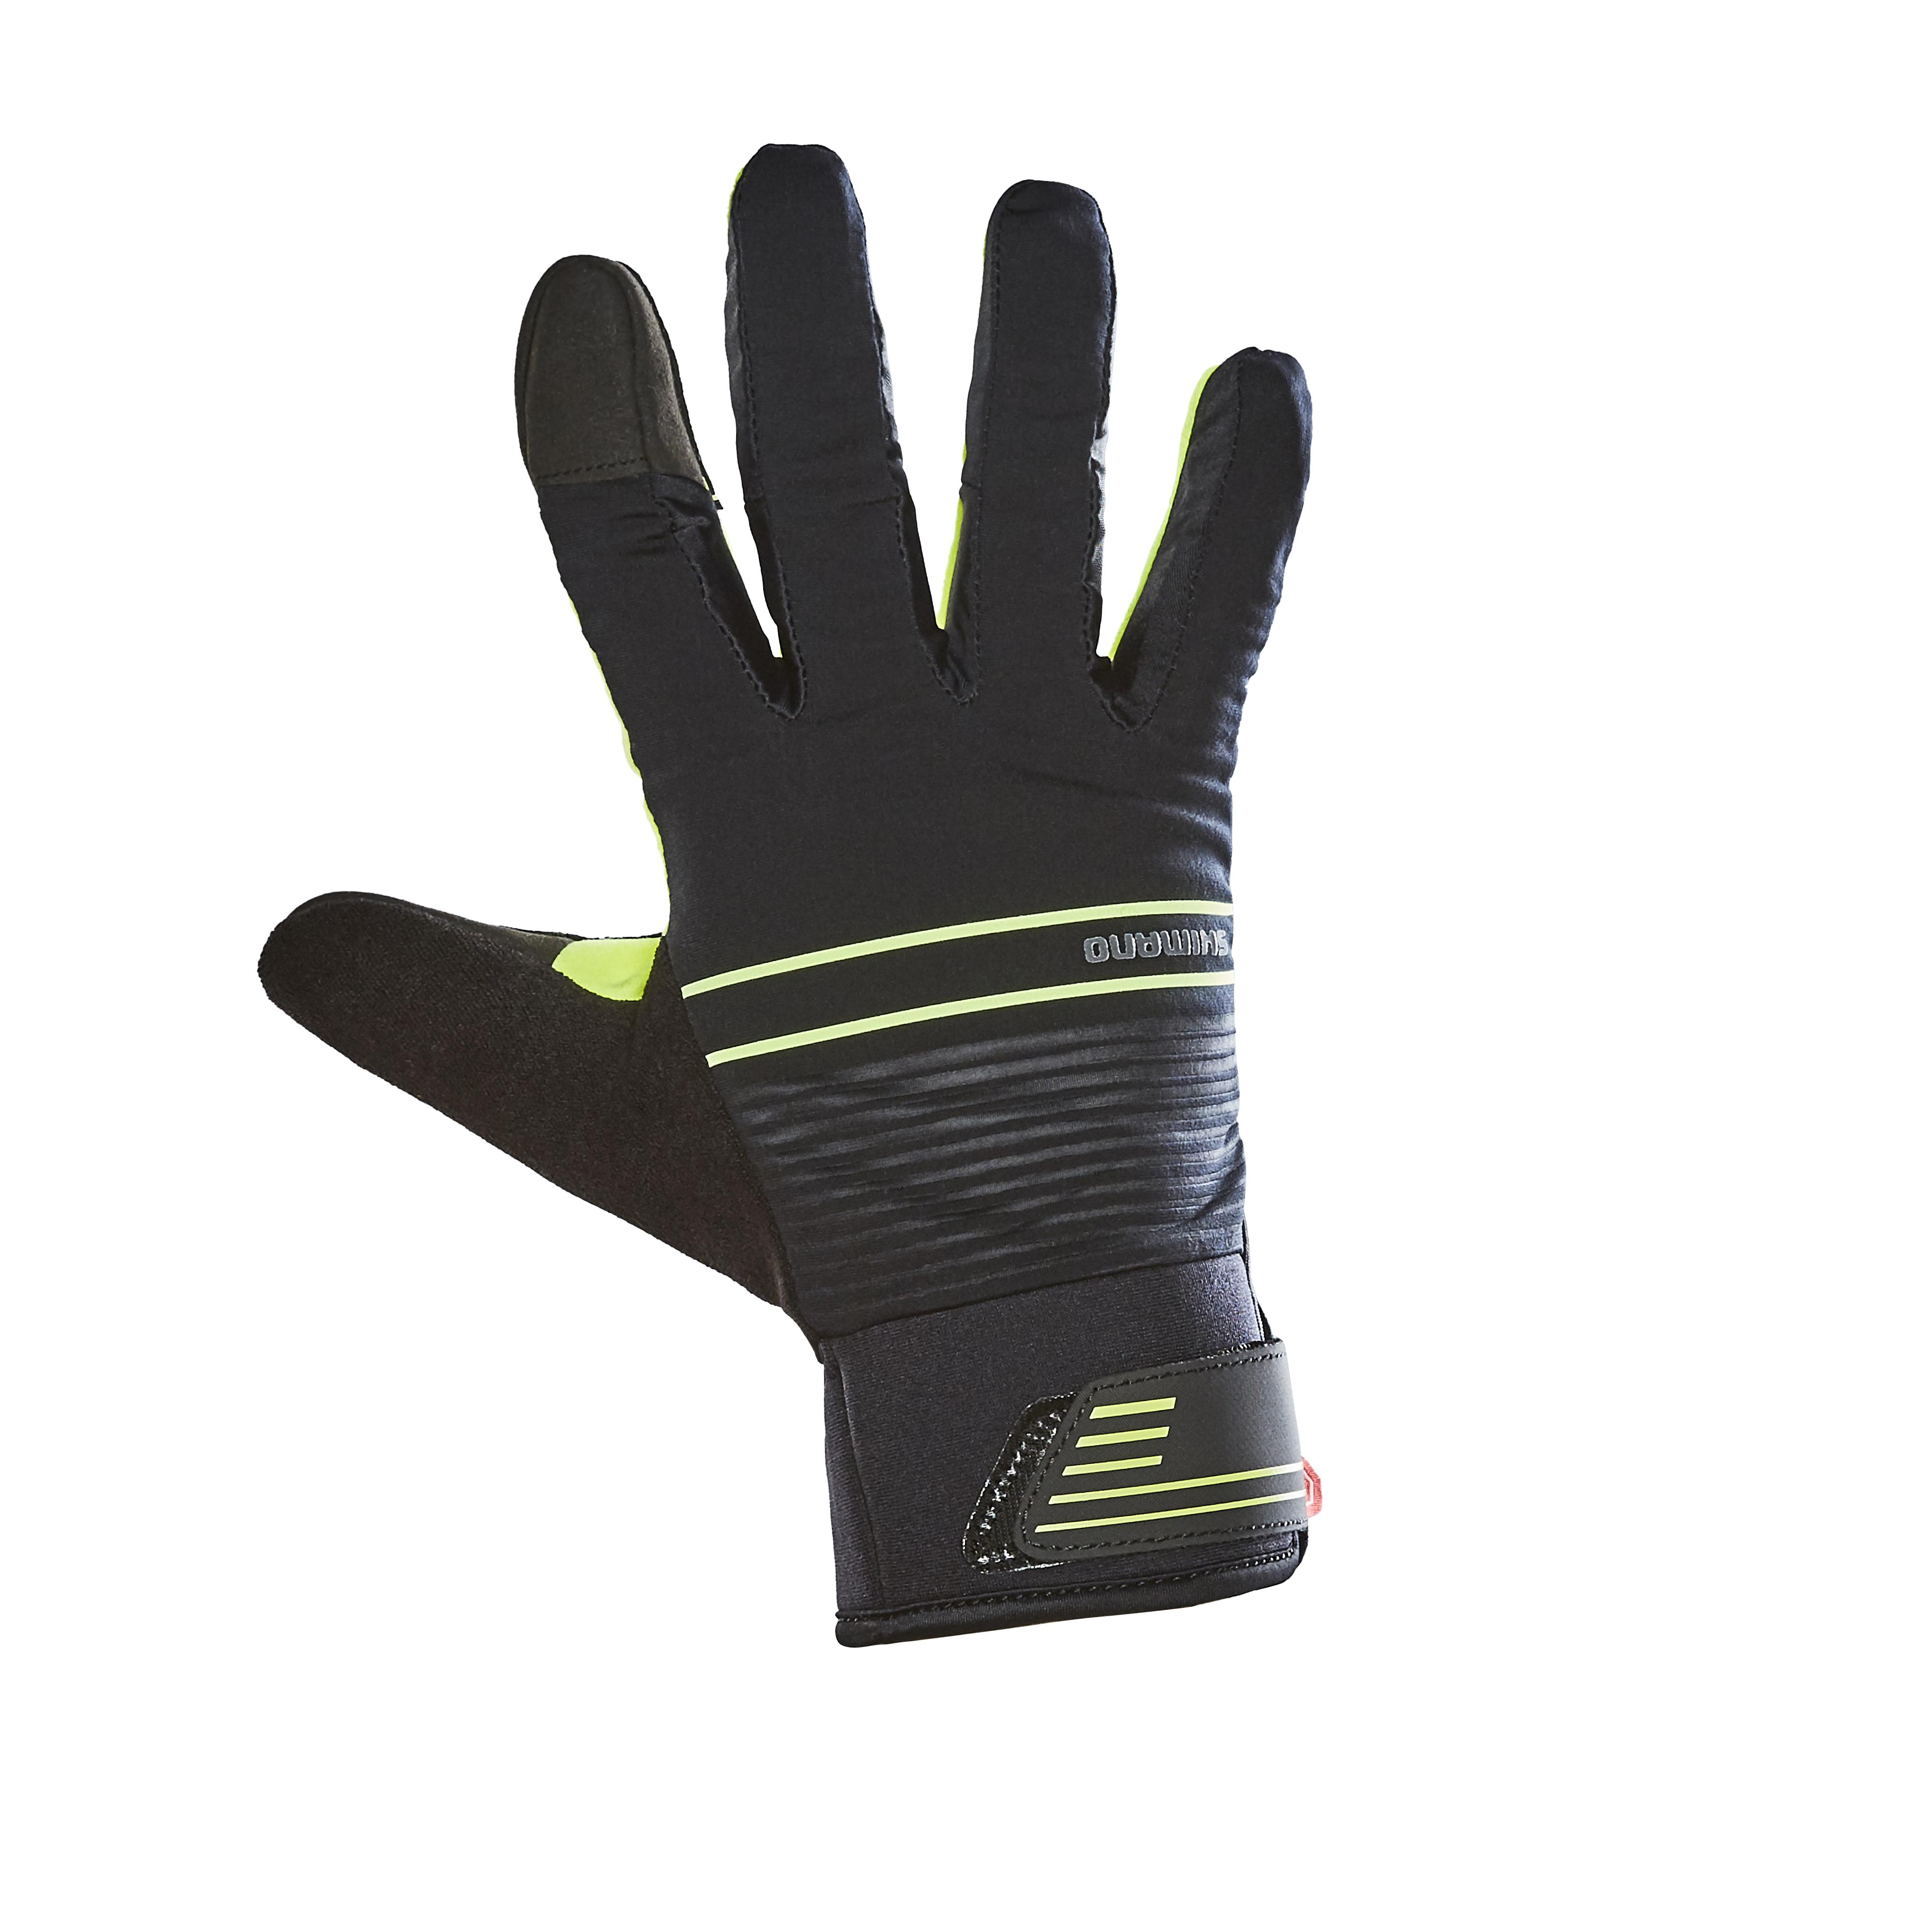 shimano gore windstopper insulated cycling gloves